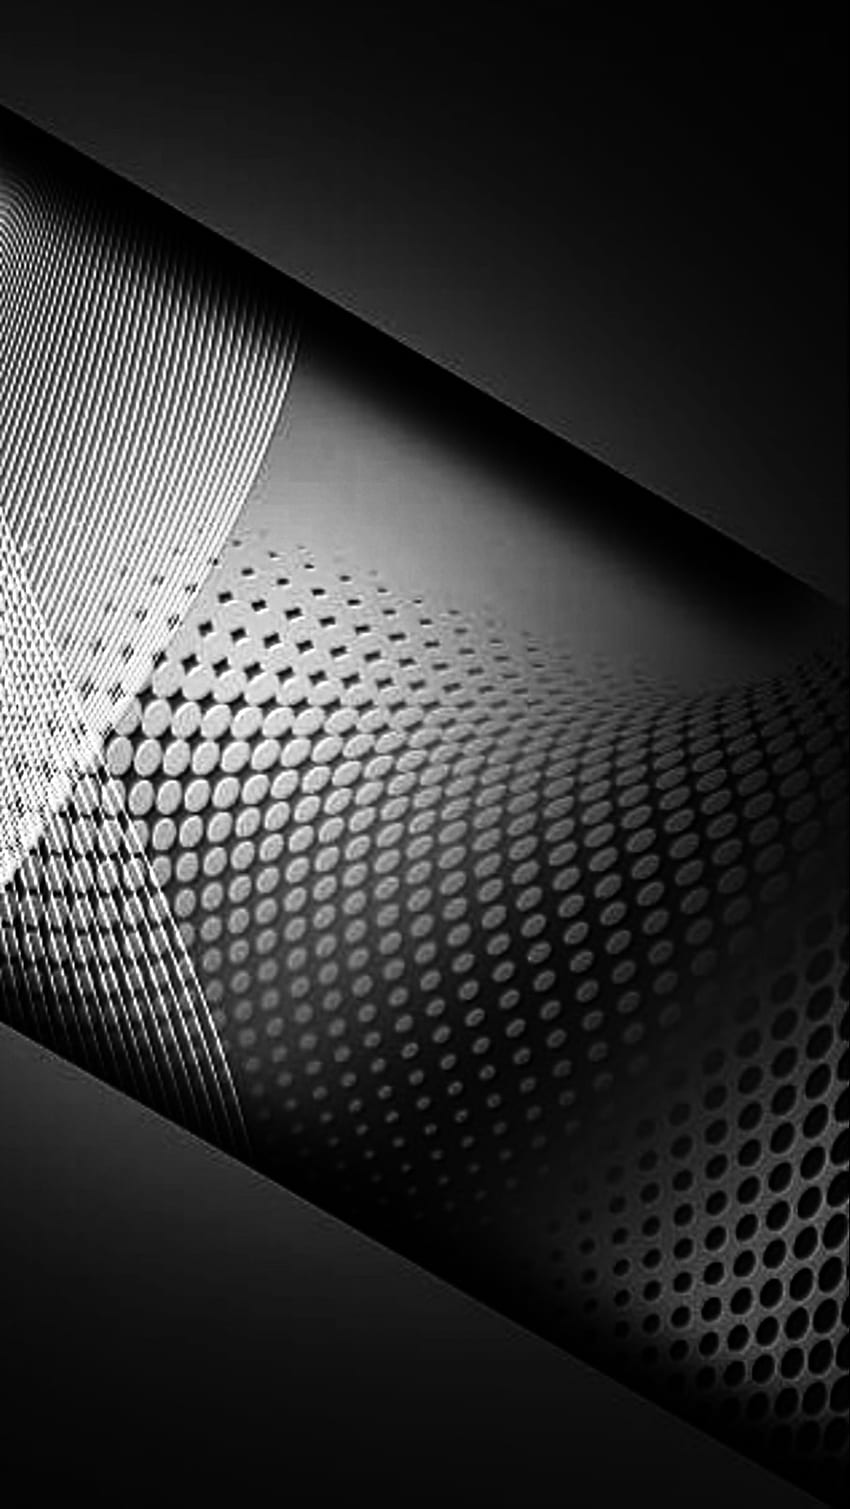 fsfds, digital, shadow, texture, black, pattern, abstract, tint, gray, material, material property, white, design, layers, overlayed HD phone wallpaper